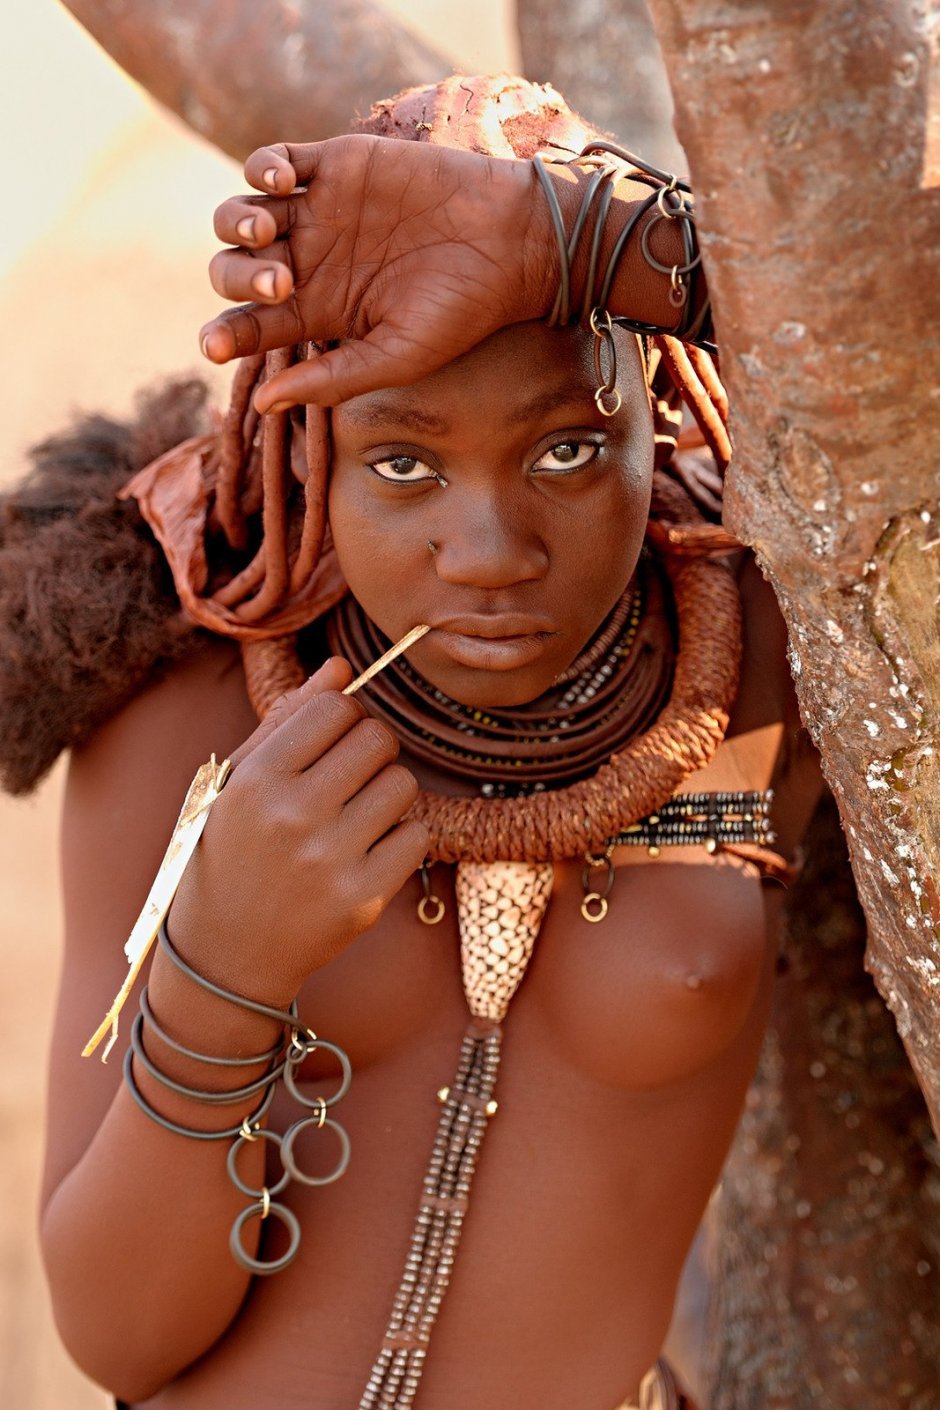 Sexy African Tribal Women - African Tribe Nudes - 39 photos